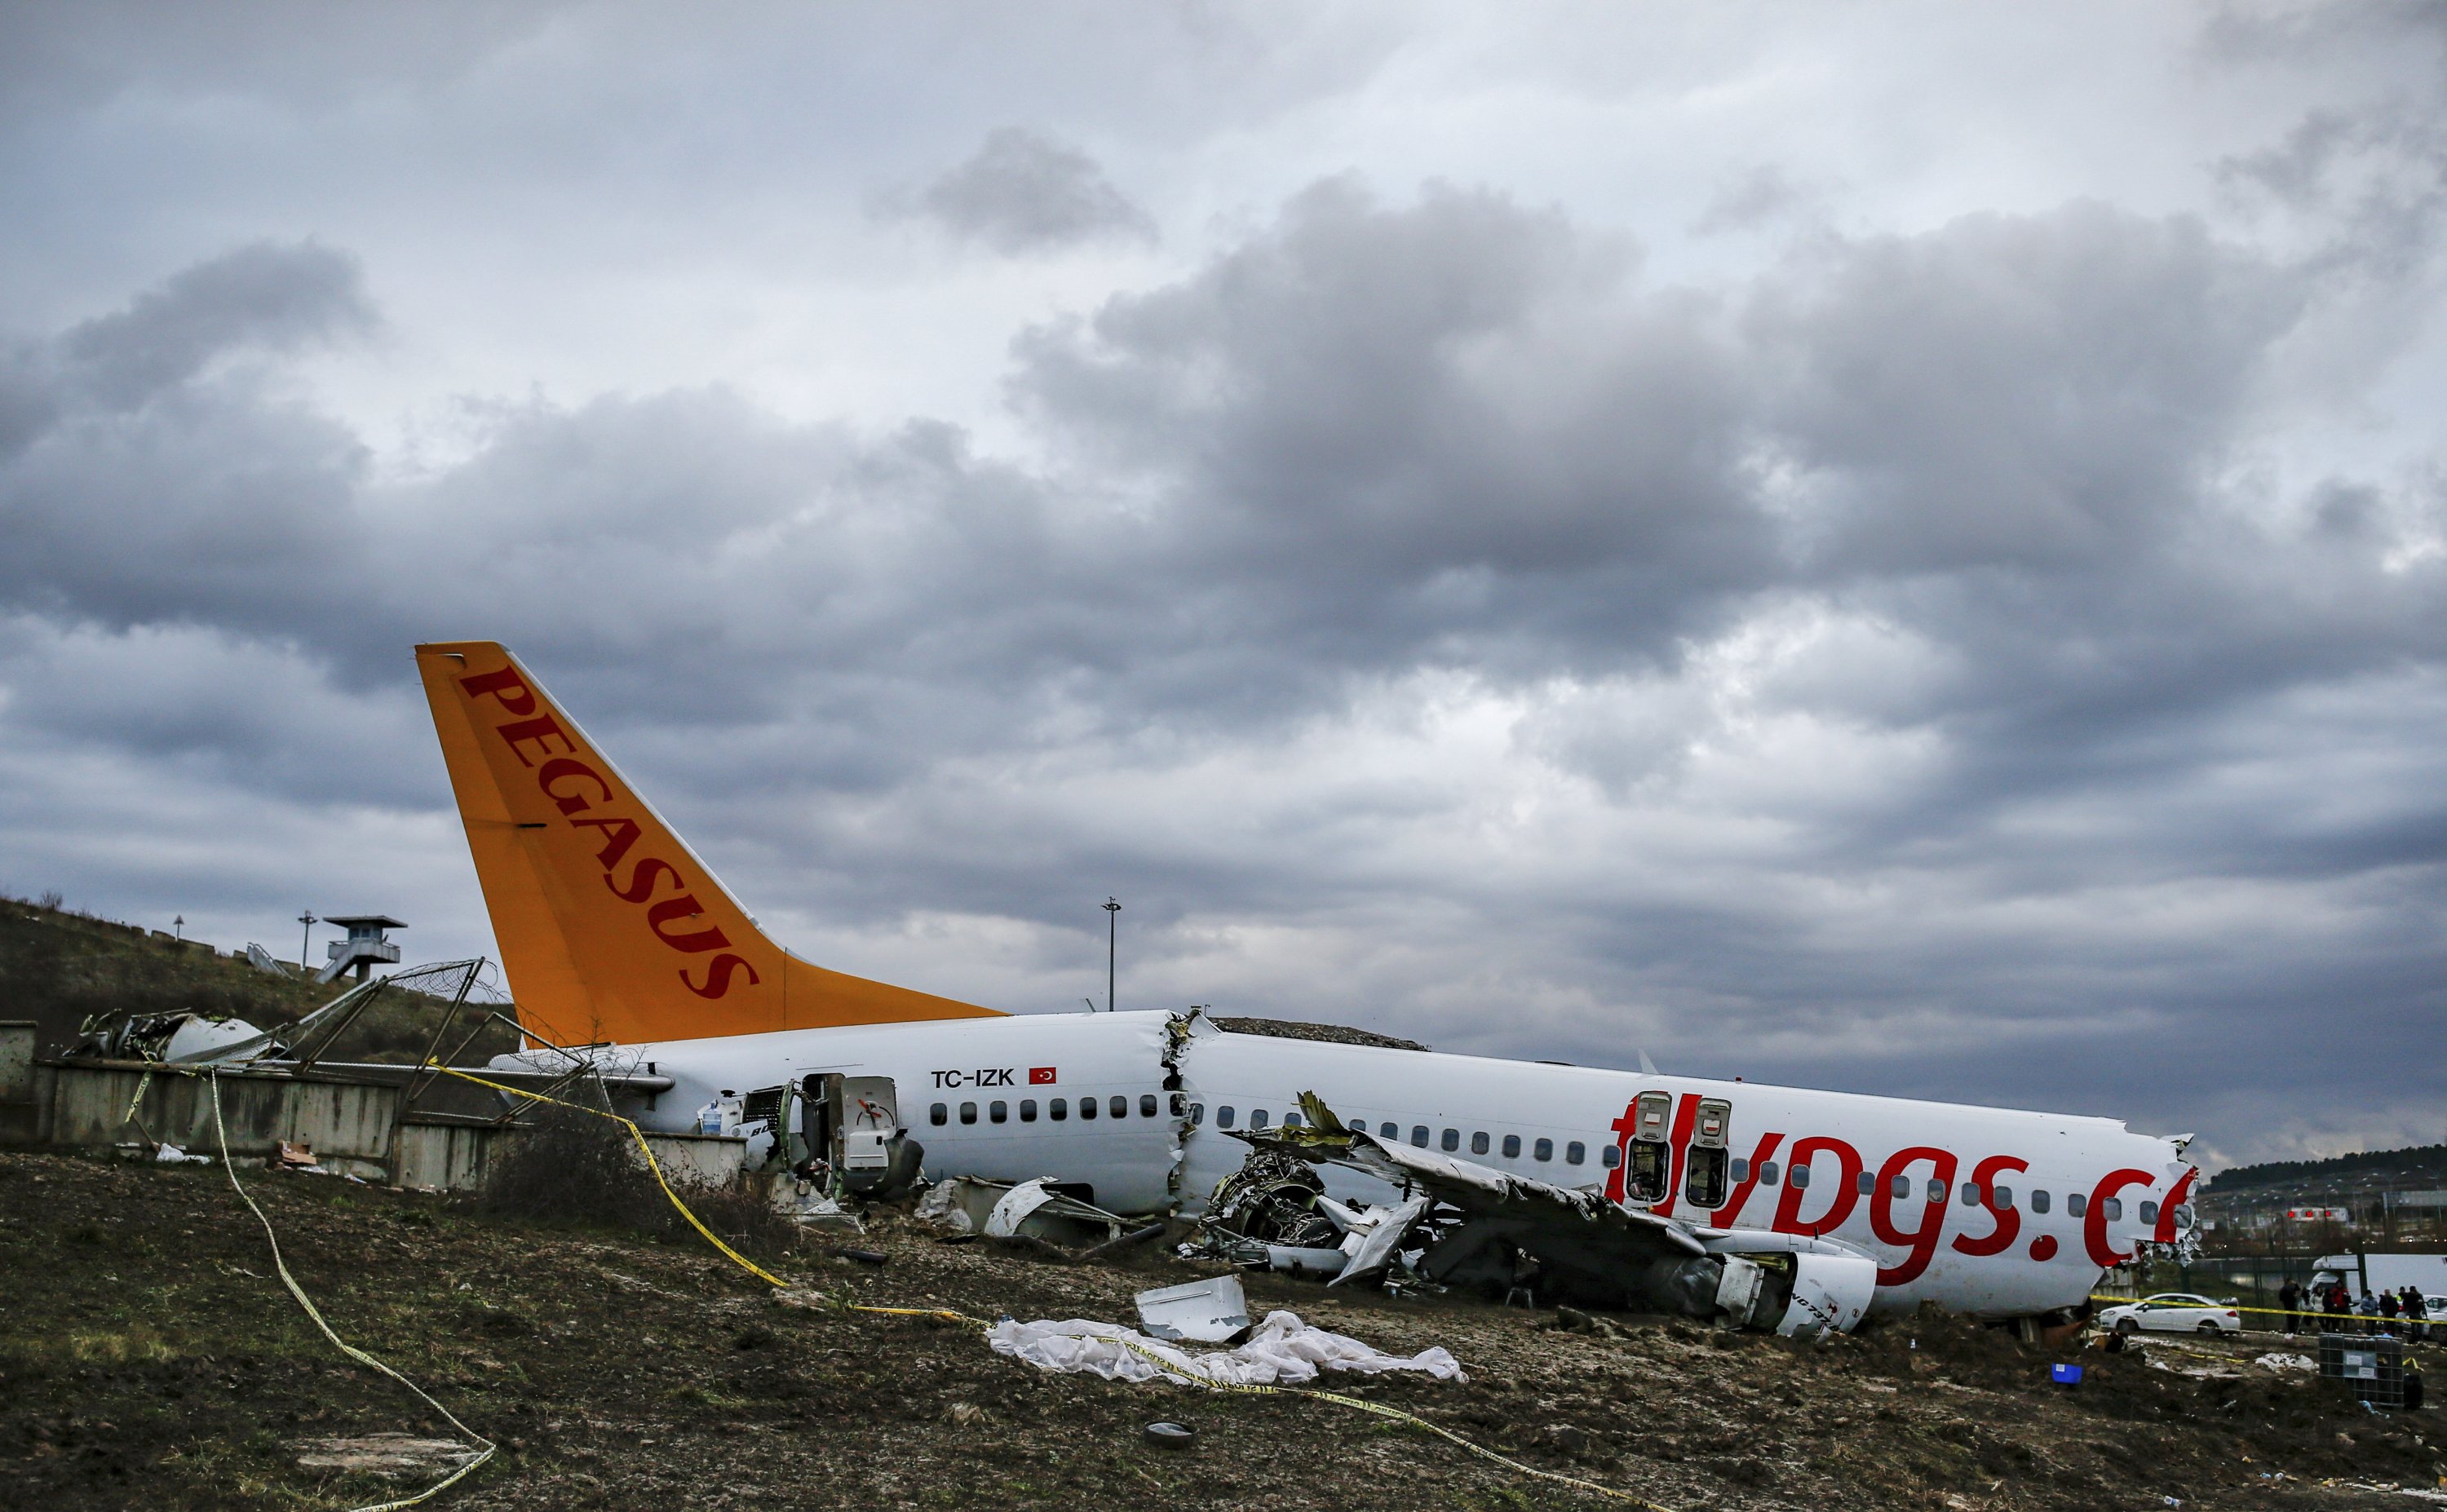 Expert report blames airport authority for Istanbul plane crash